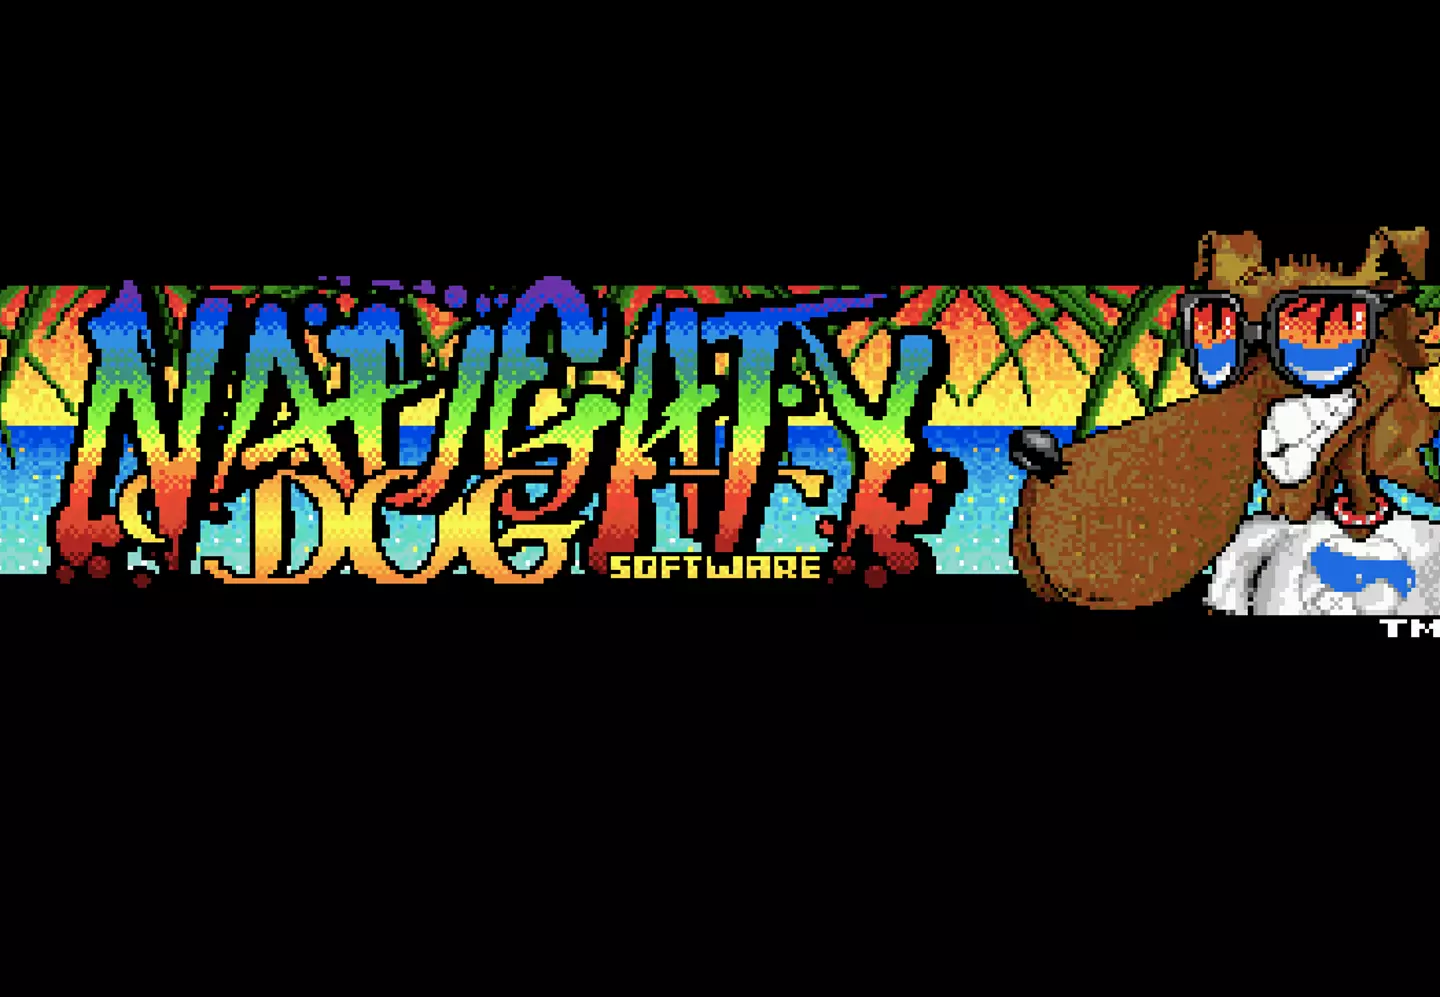 The Naughty Dog logo of 1992, as it appears in Rings of Power /